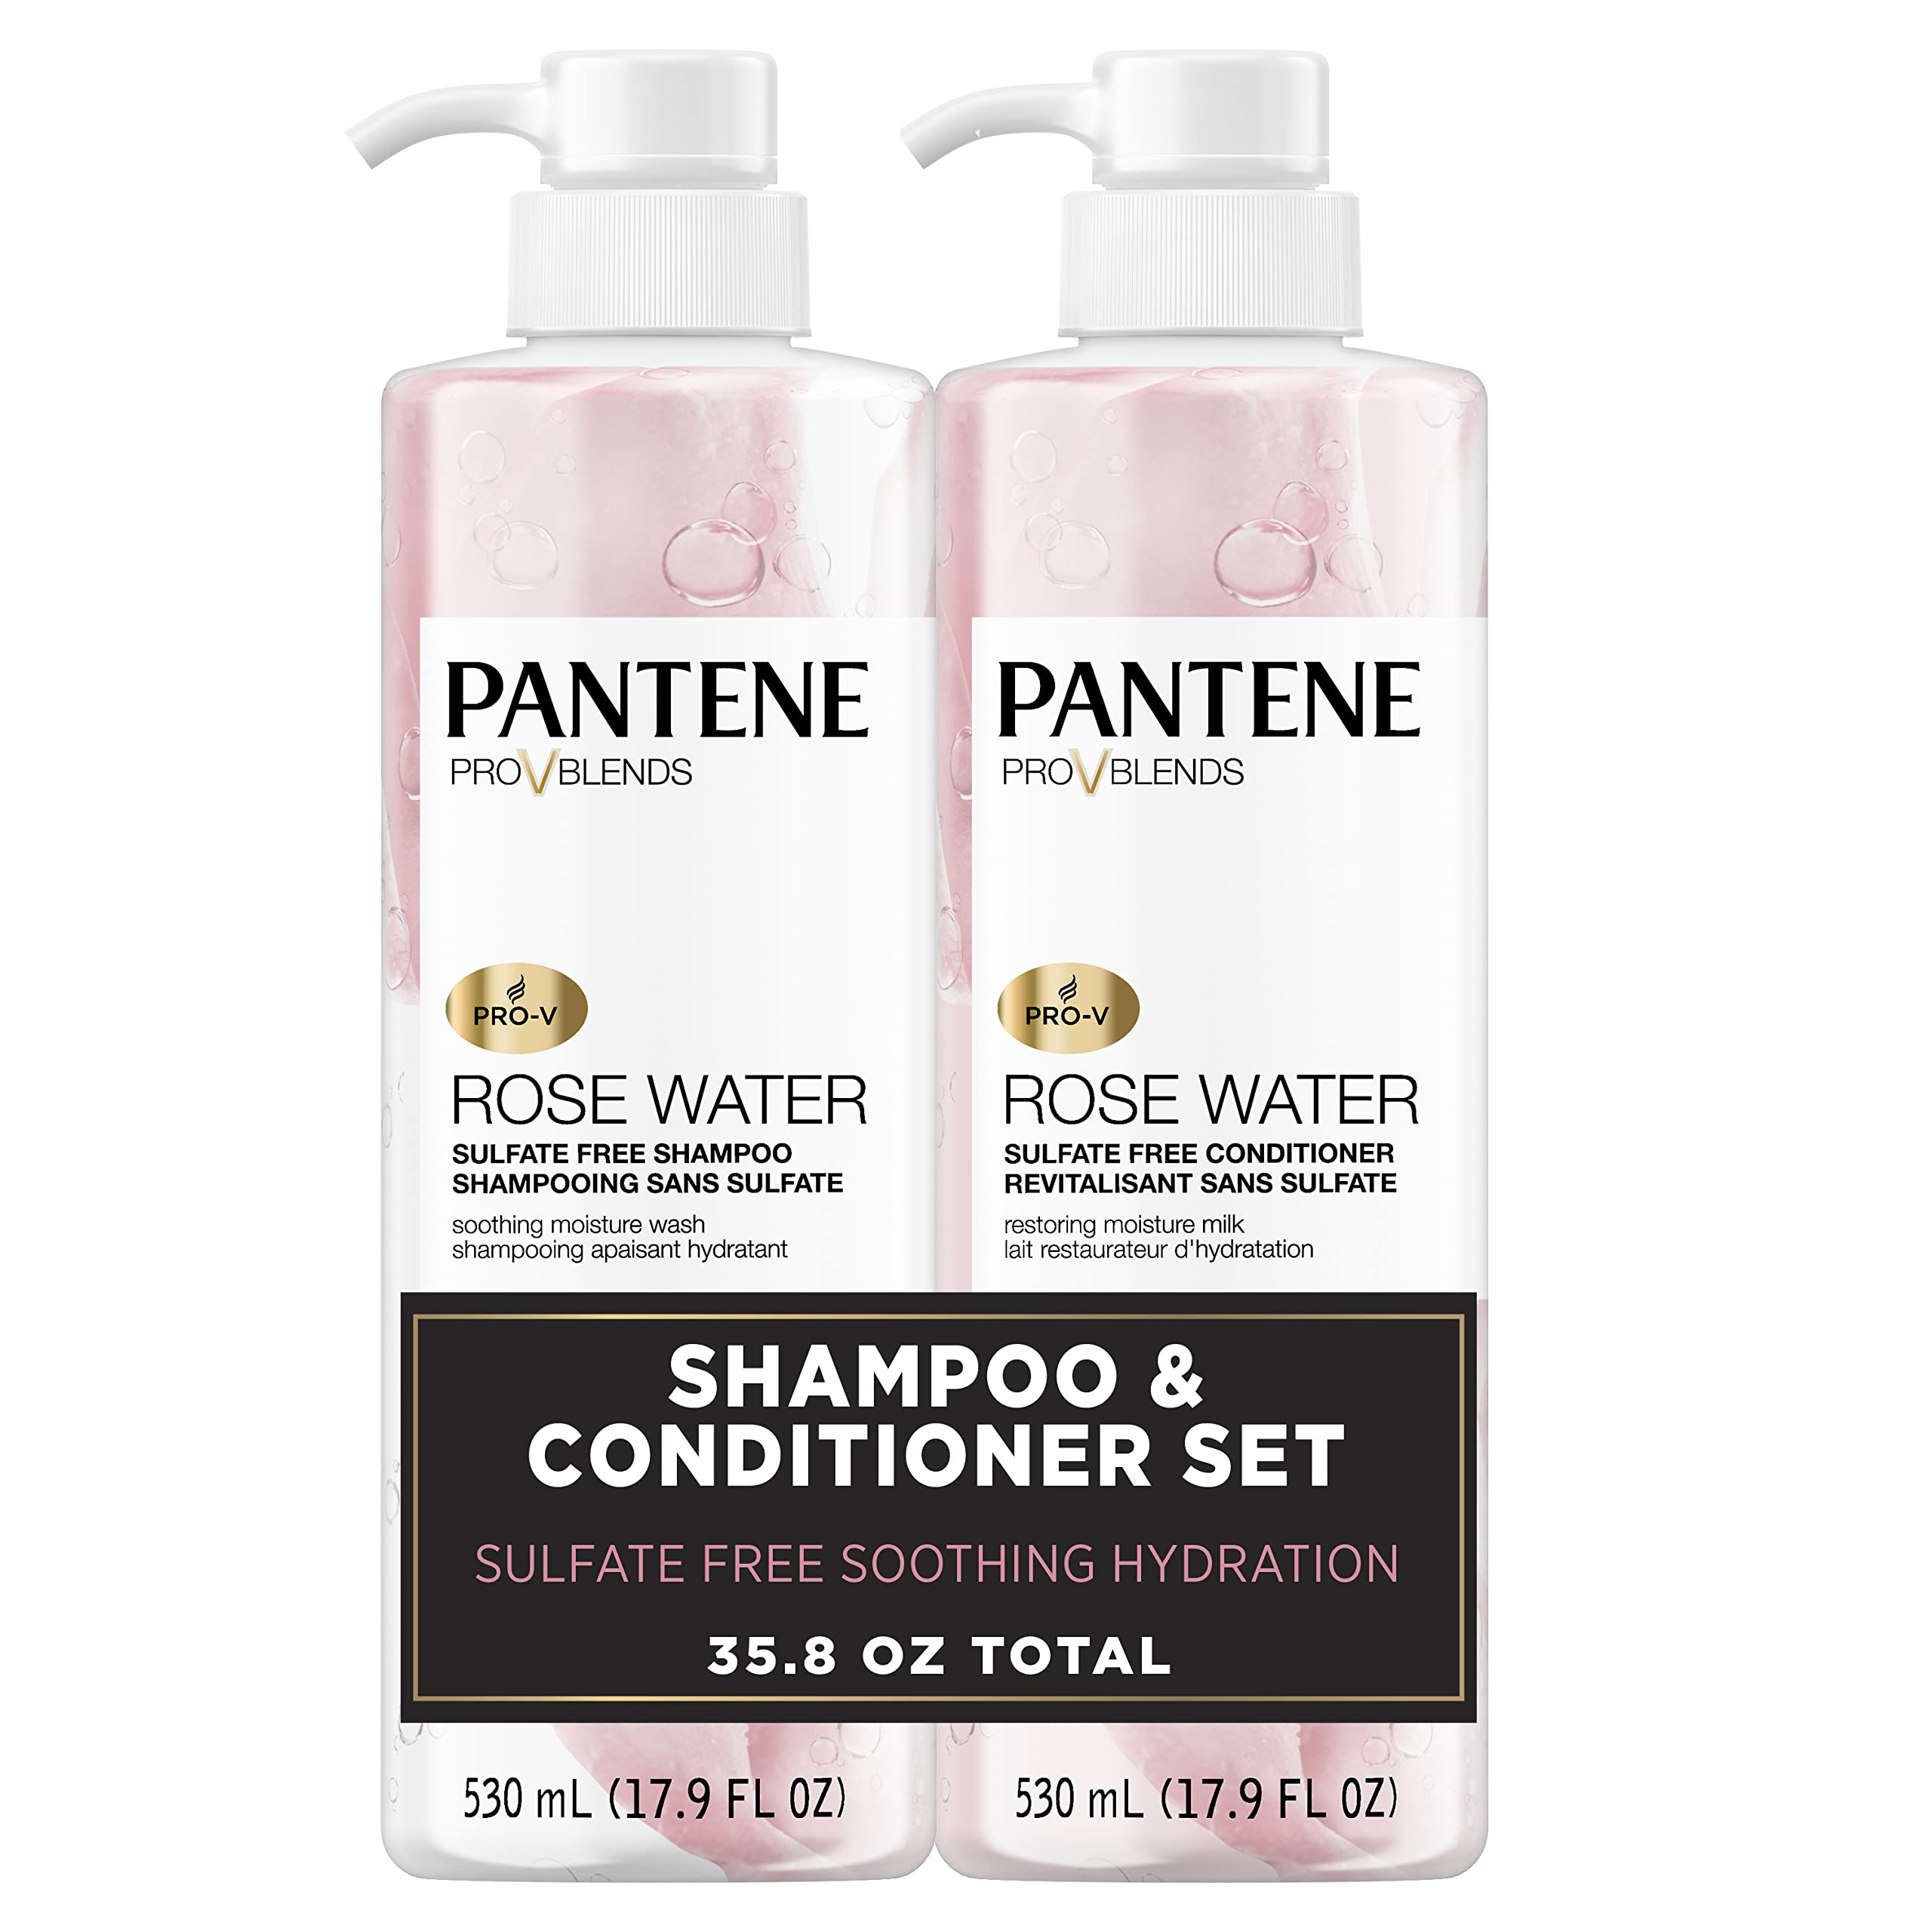 Pantene Sulfate Free Shampoo and Conditioner Set, Rose Water, Soothing and Moisturizing, Nutrient Infused with Vitamin B5, for all Hair Types, Safe for Color Treated Hair,Pro-V Blends, 17.9 oz,2-Count